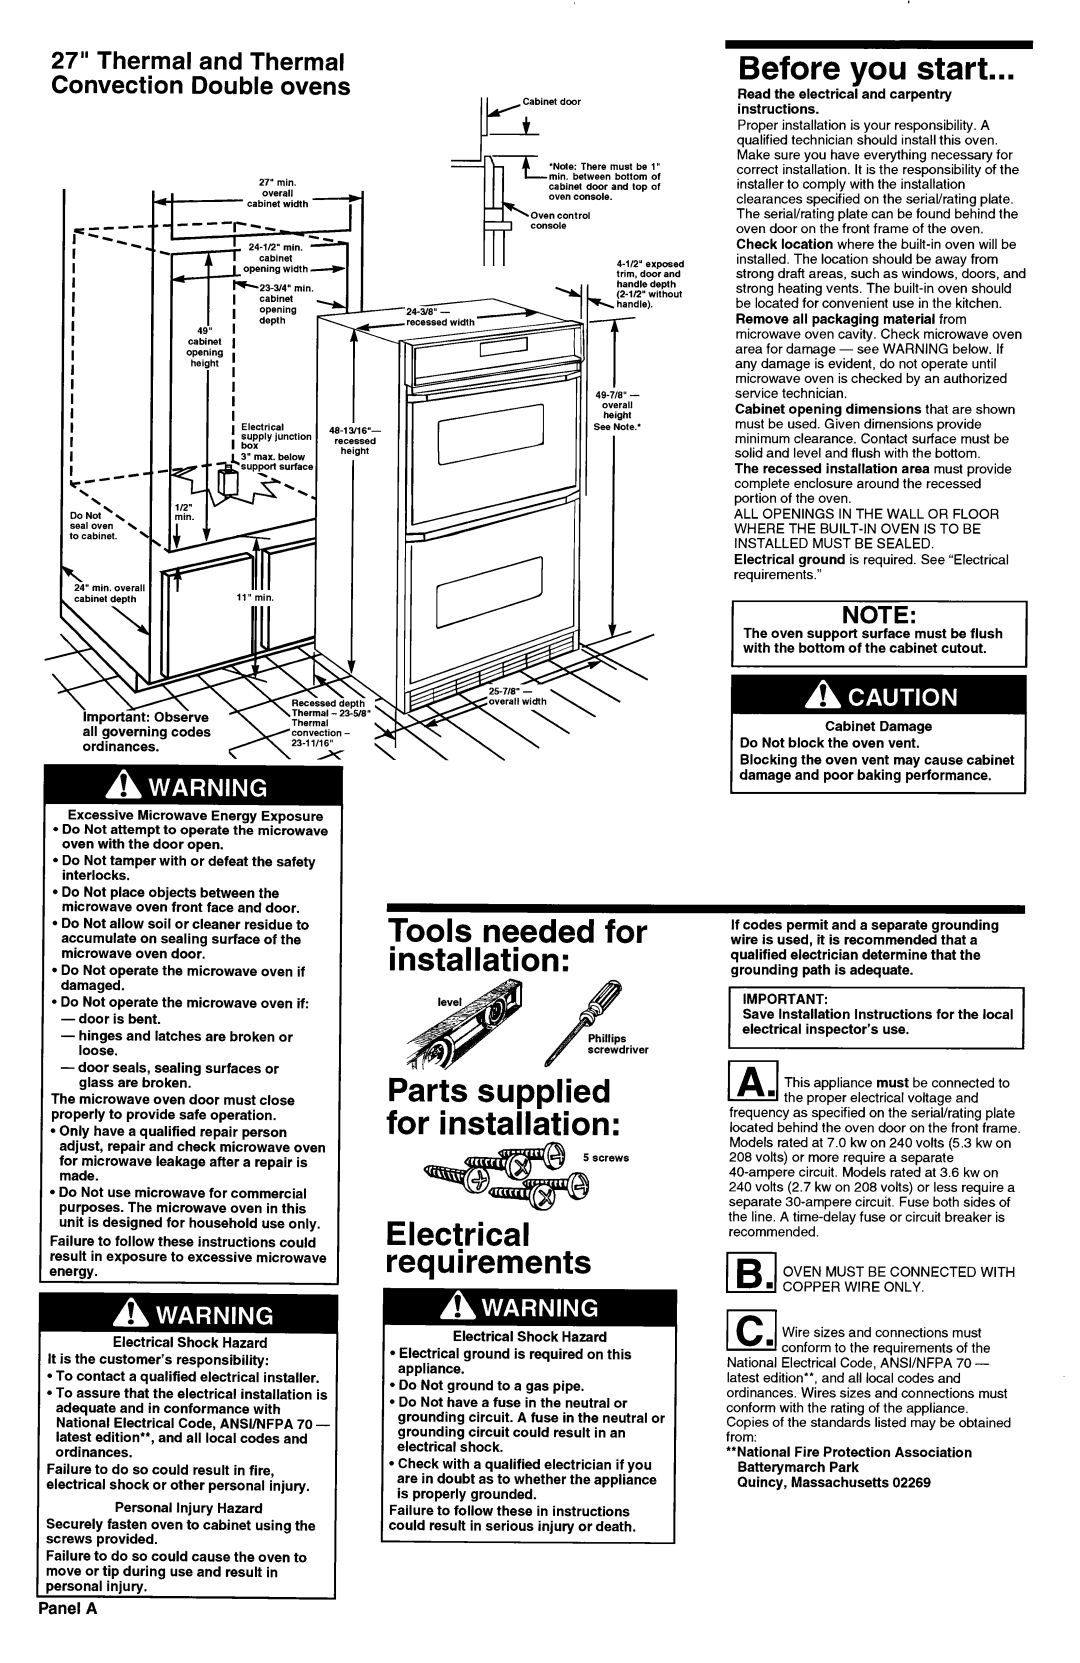 KitchenAid 3184435 REV. A Before you start, Tools needed for installation, ‘arts supplied ‘or installation, I Note 